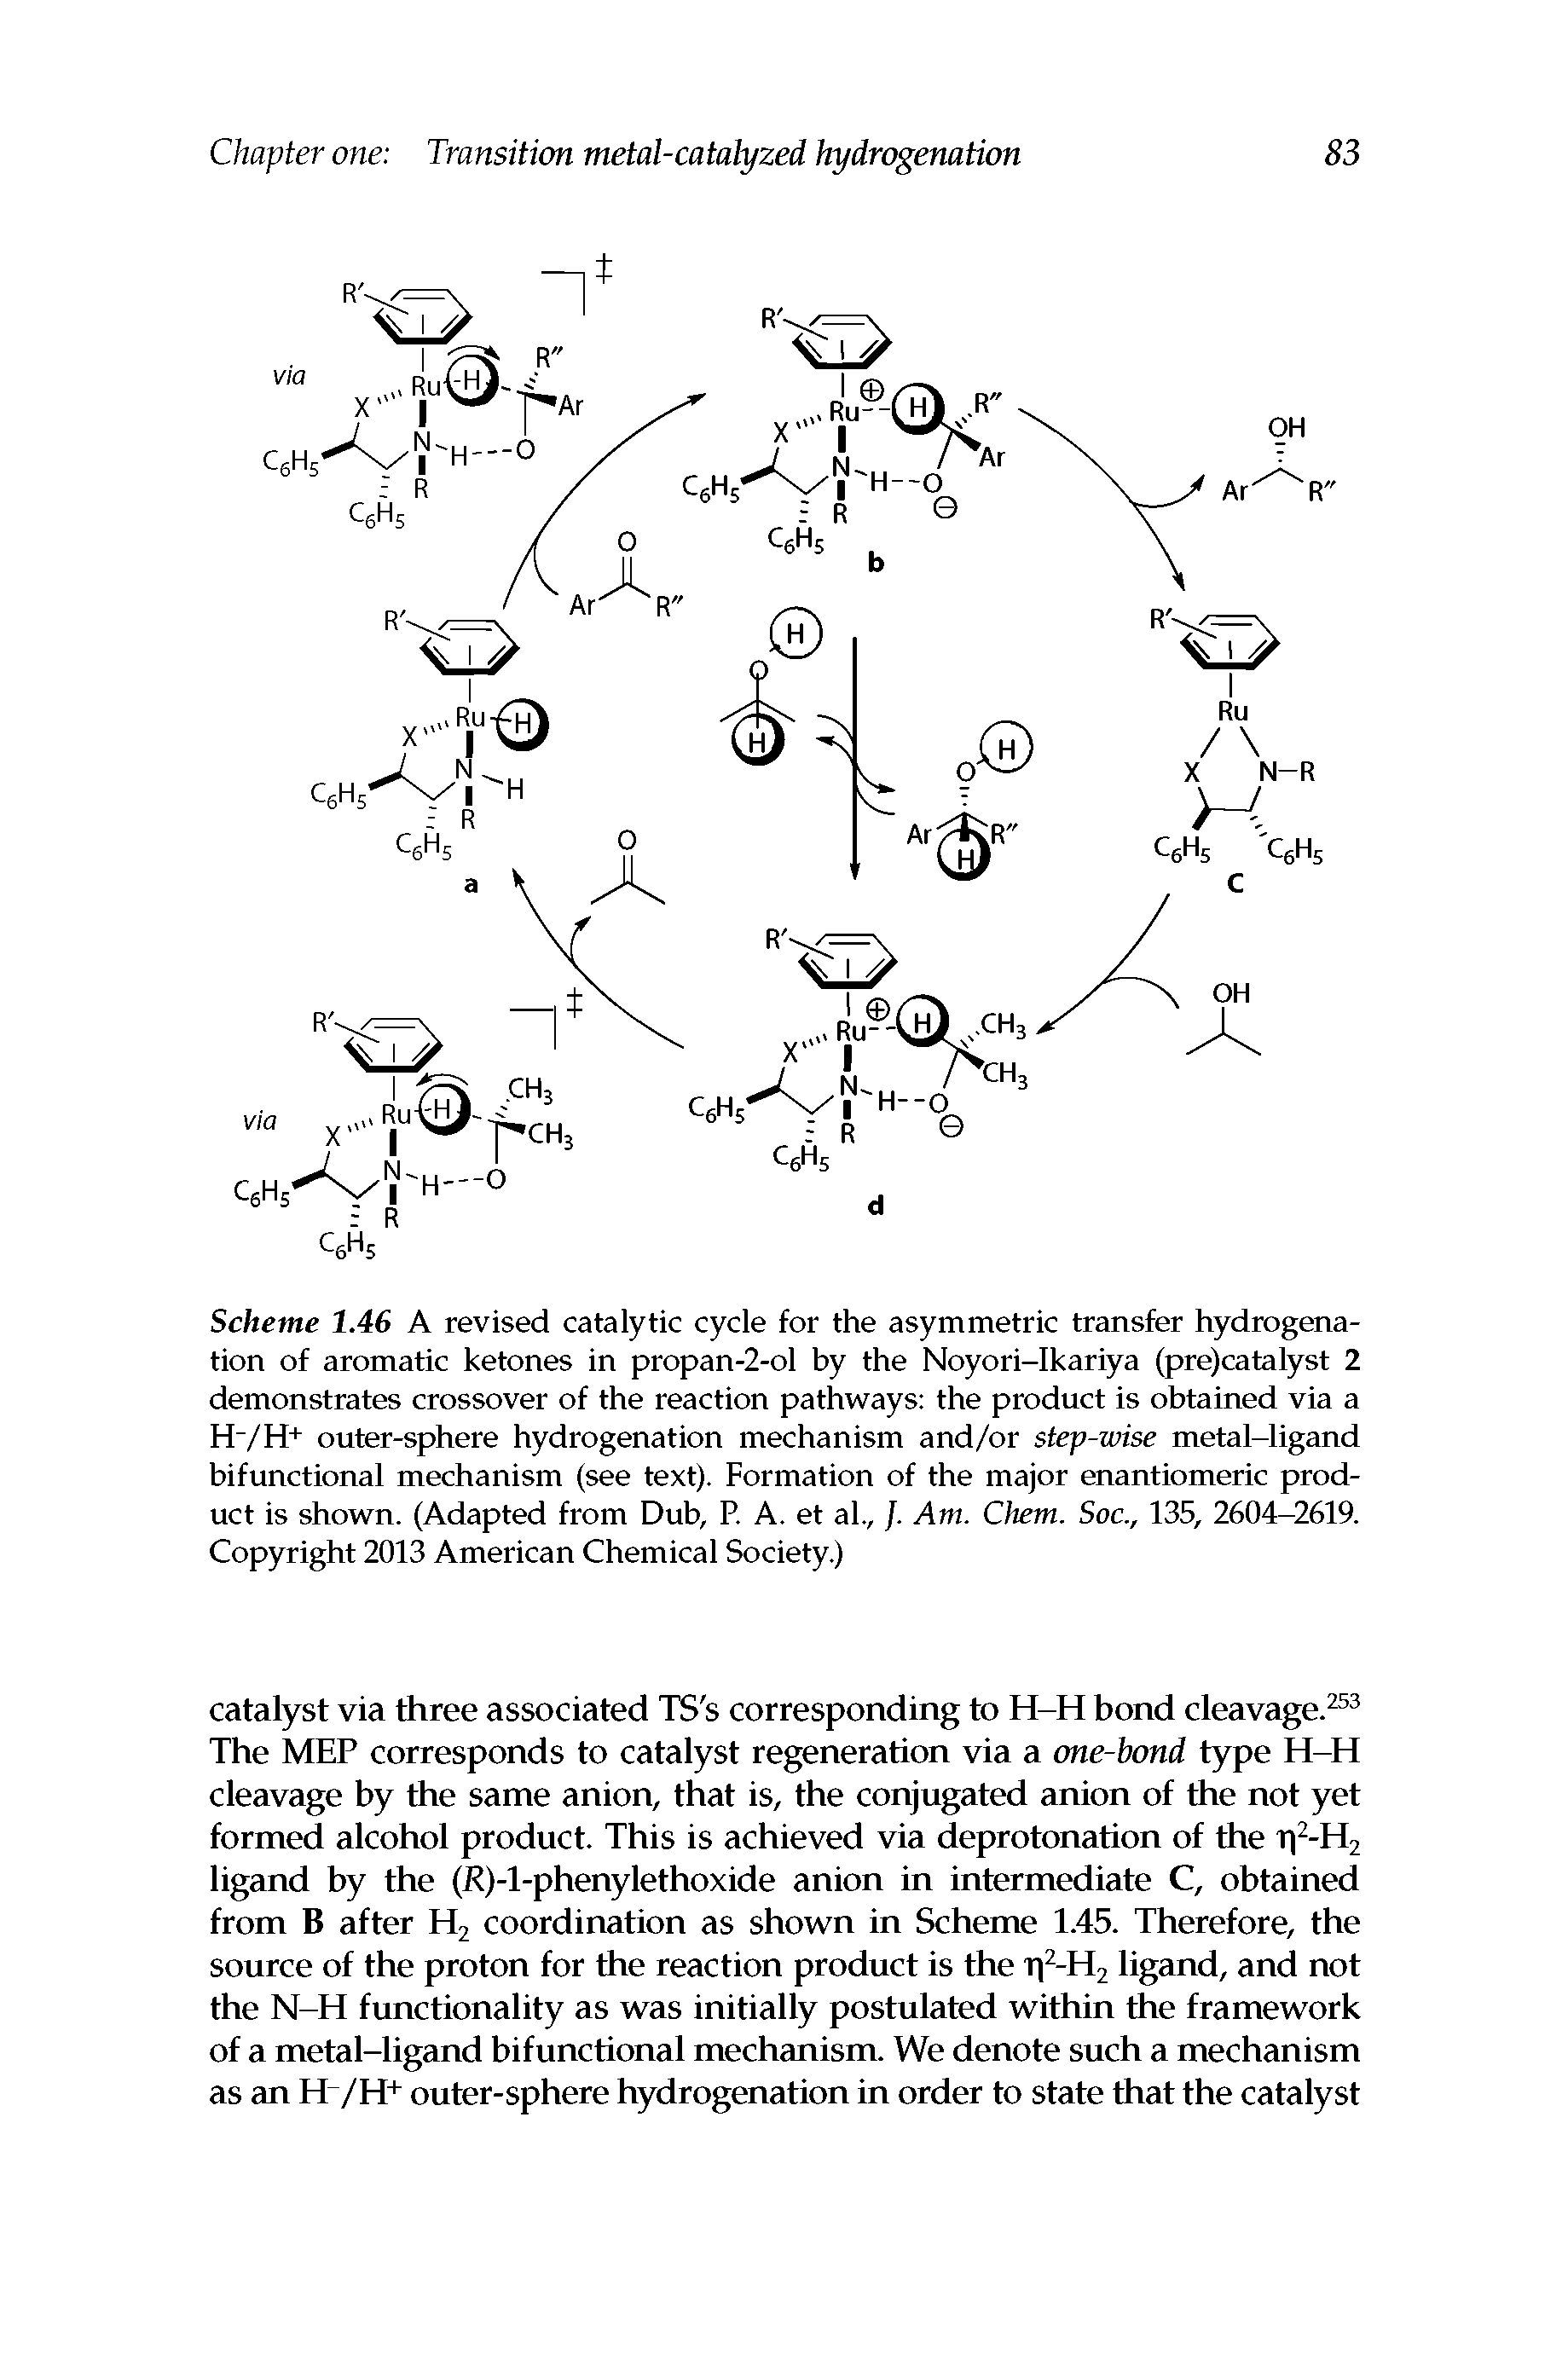 Scheme 1.46 A revised catalytic cycle for the asymmetric transfer hydrogenation of aromatic ketones in propan-2-ol by the Noyori-Ikariya (pre)catalyst 2 demonstrates crossover of the reaction pathways the product is obtained via a H"/H+ outer-sphere hydrogenation mechanism and/or step-wise metal-ligand bifunctional mechanism (see text). Formation of the major enantiomeric product is shown. (Adapted from Dub, P. A. et al., /. Am. Chem. Soc., 135, 2604-2619. Copyright 2013 American Chemical Society.)...